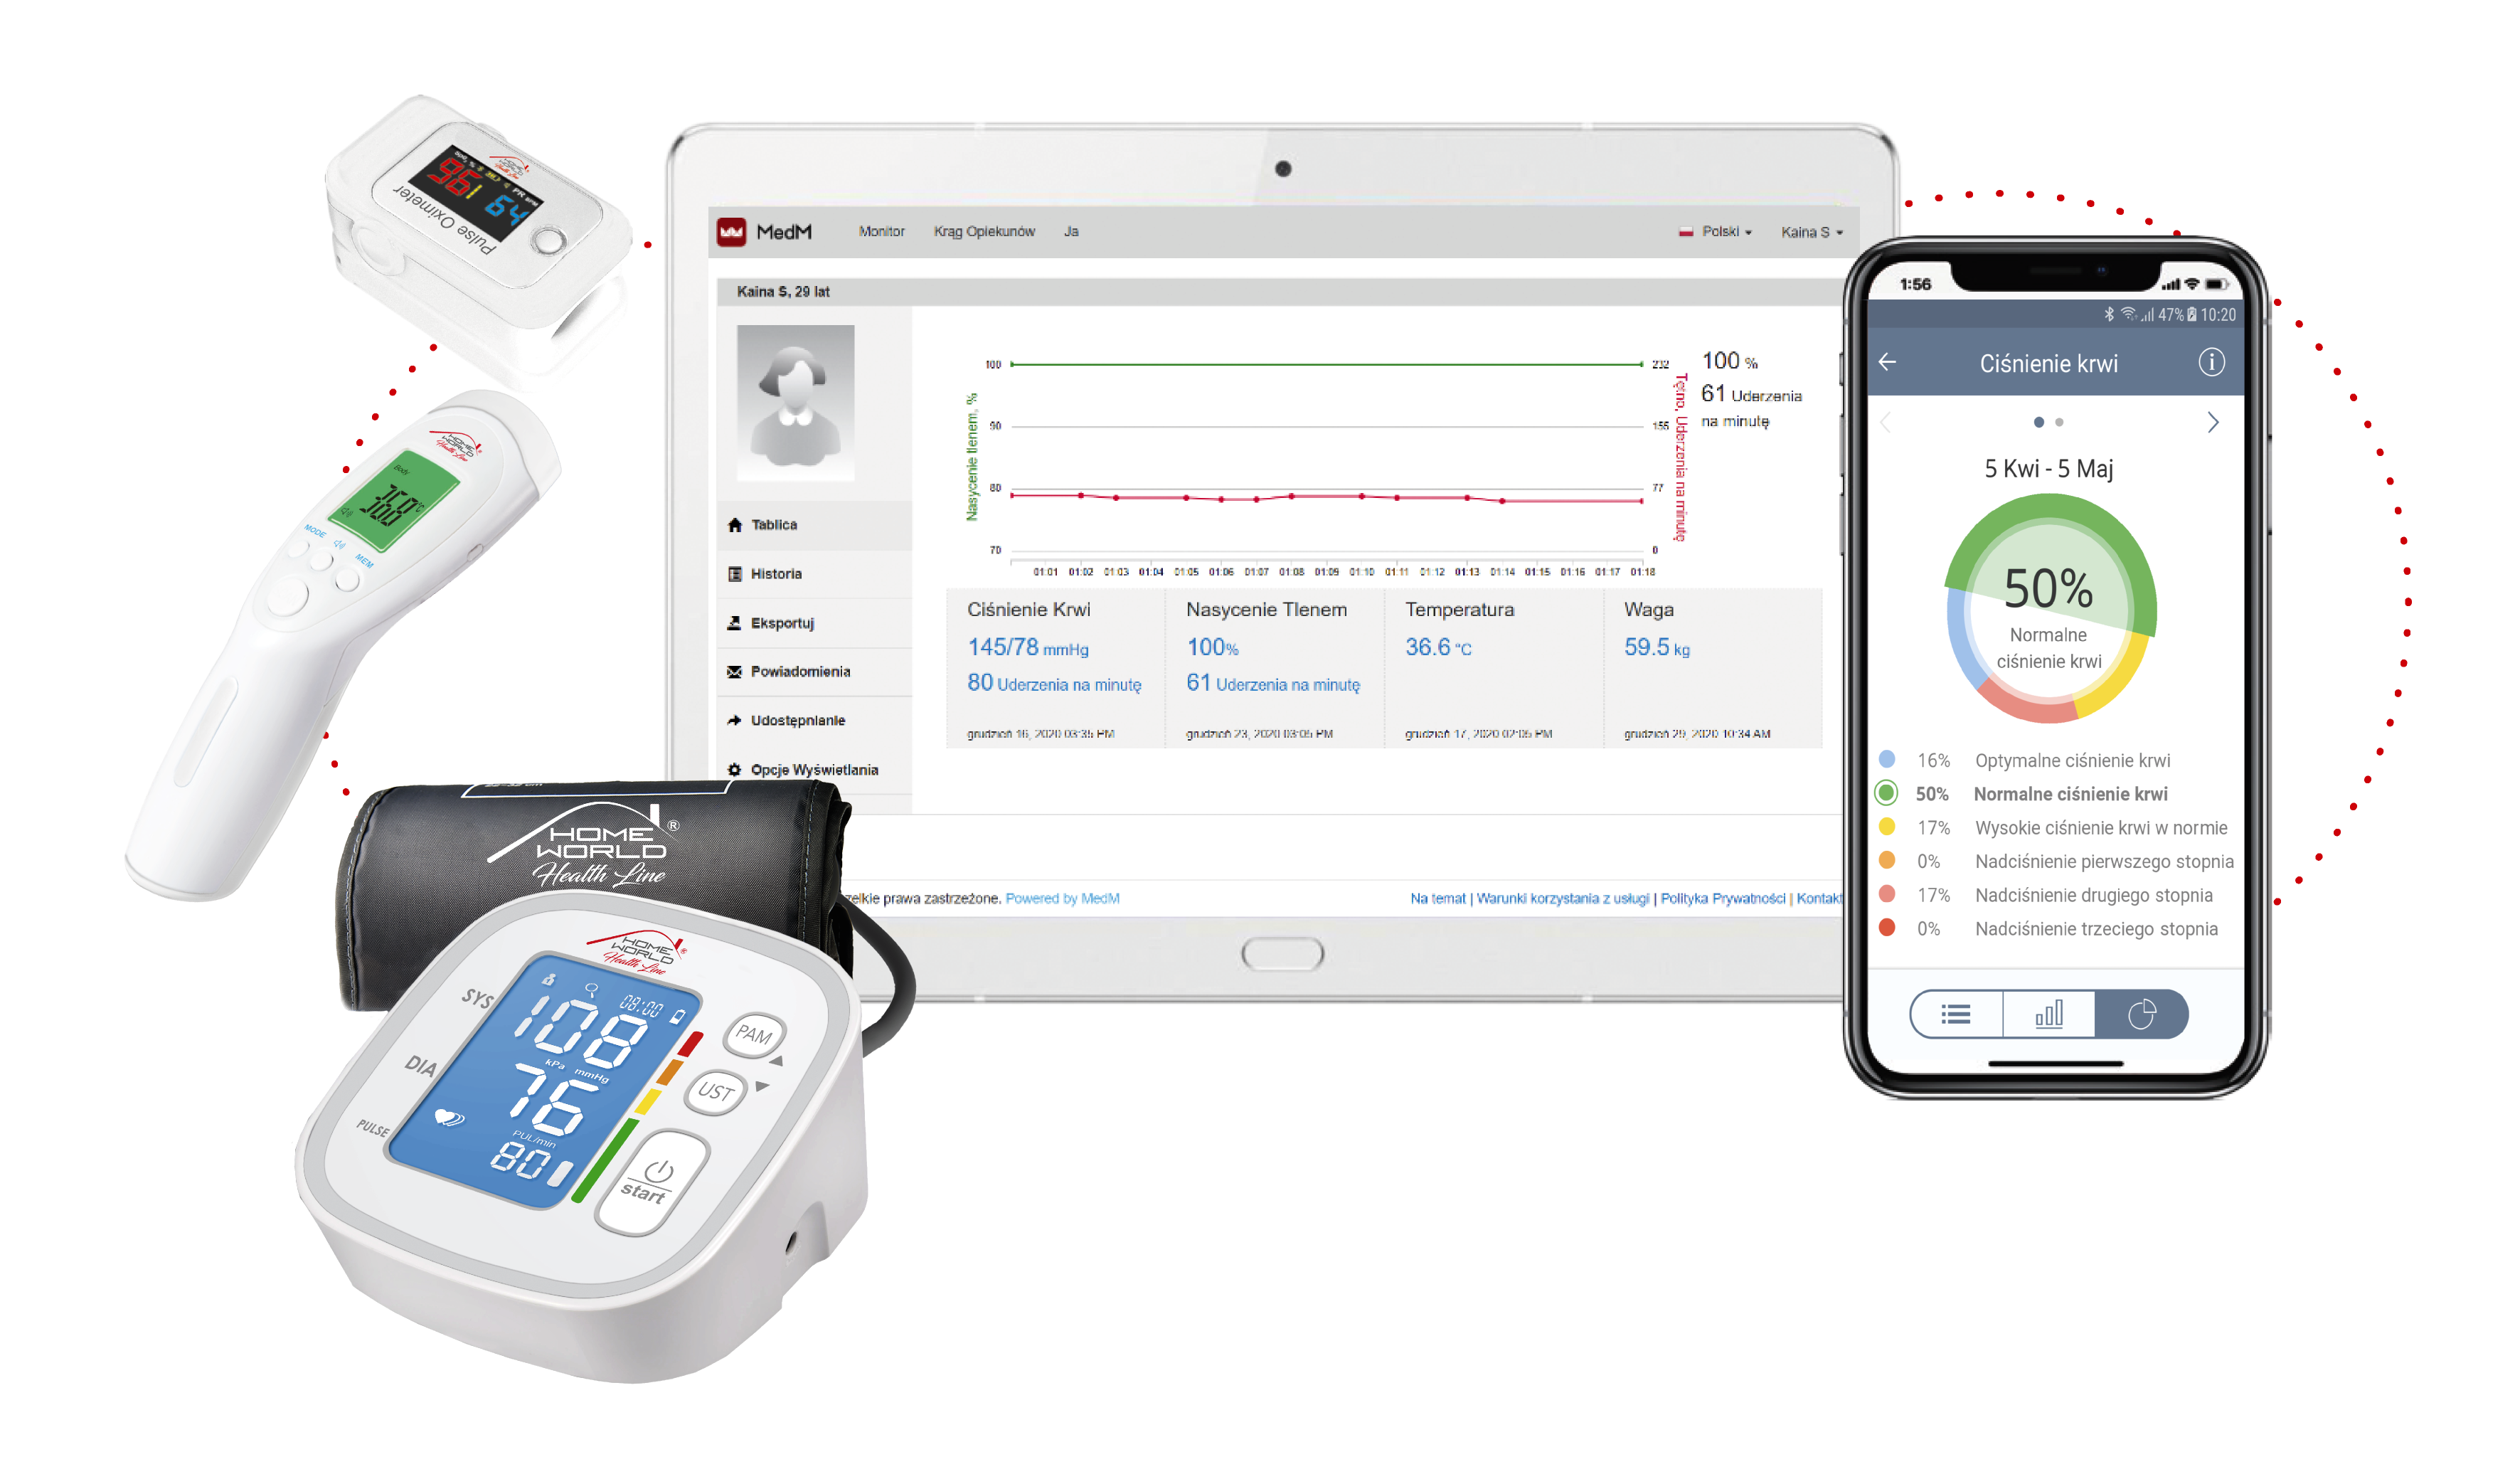 MedM Partners with a Leading Smart Medical Device Retailer in Poland